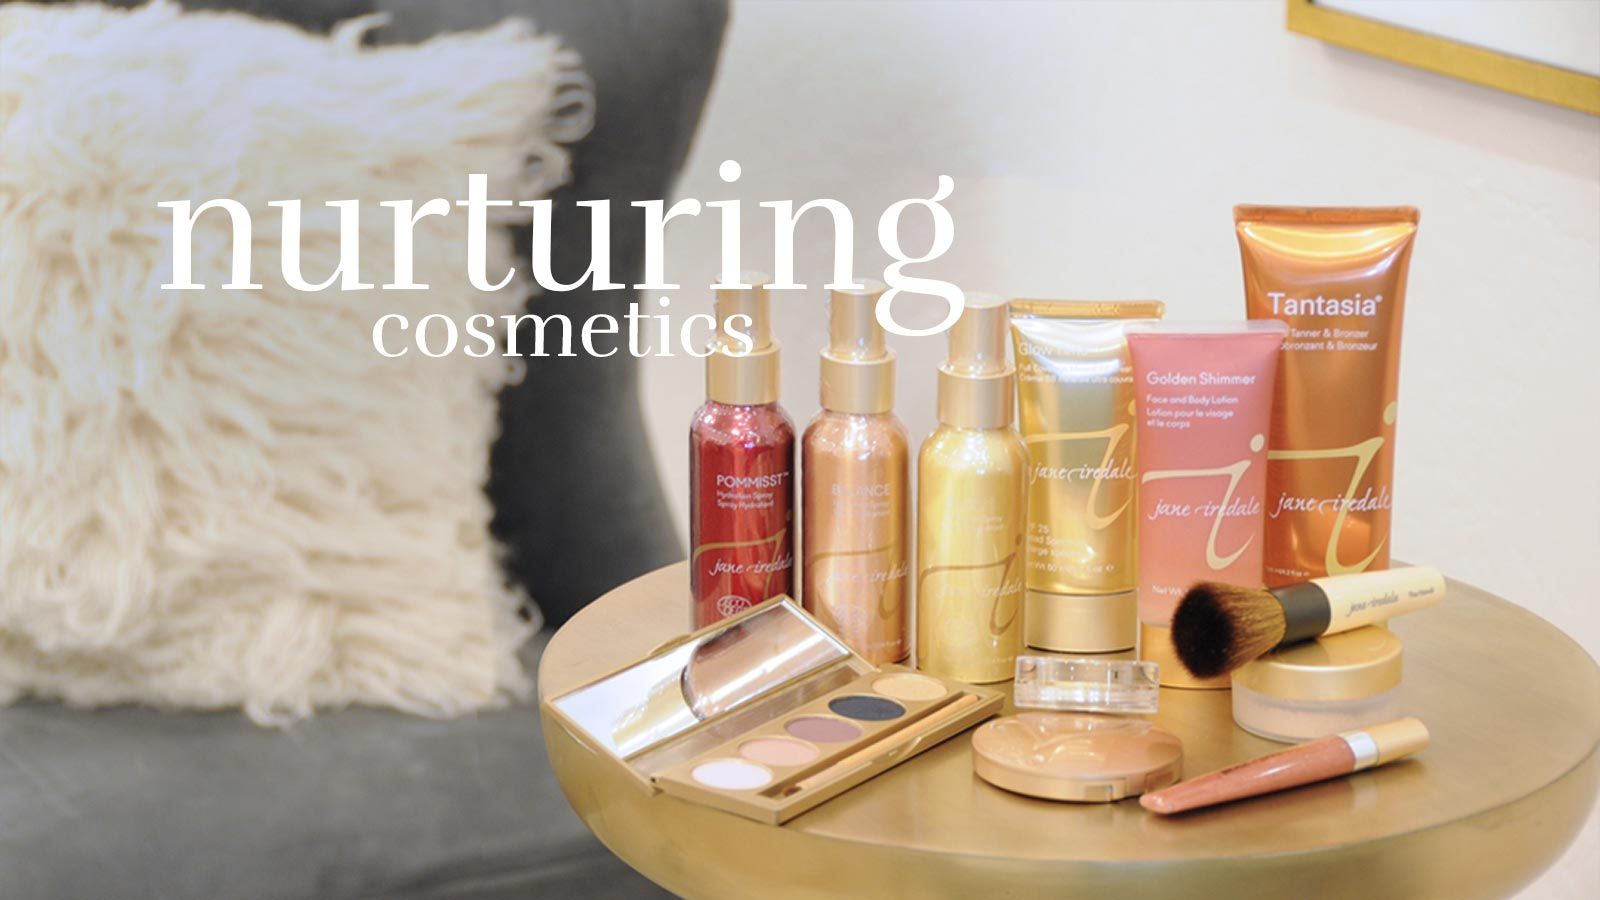 nurturing natural cosmetics from Jane Iredale and more